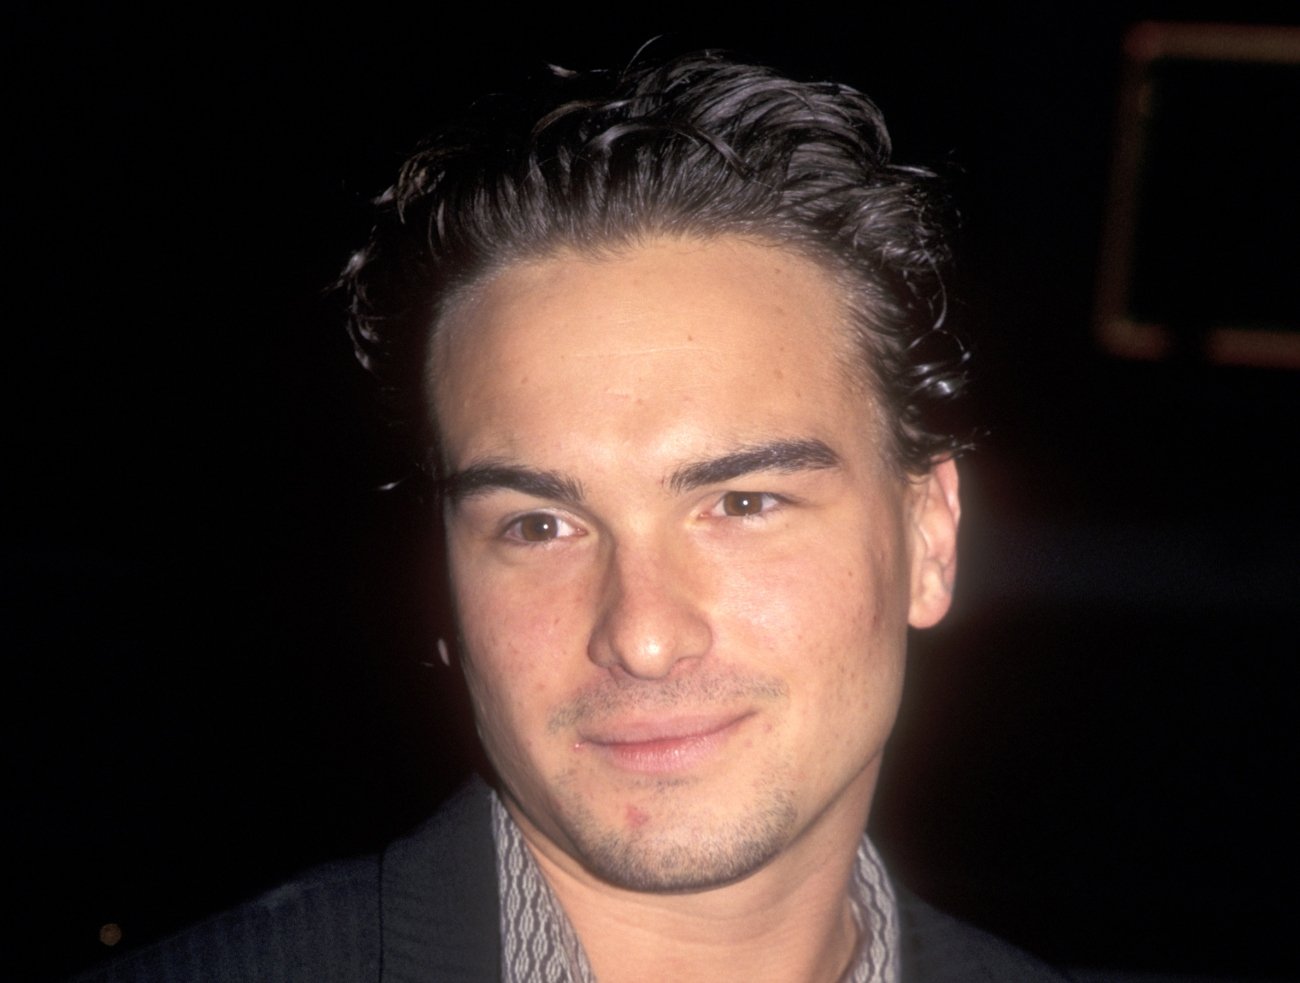 Johnny Galecki attends the 'I Know What You Did Last Summer' Hollywood premiere on October 8, 1997